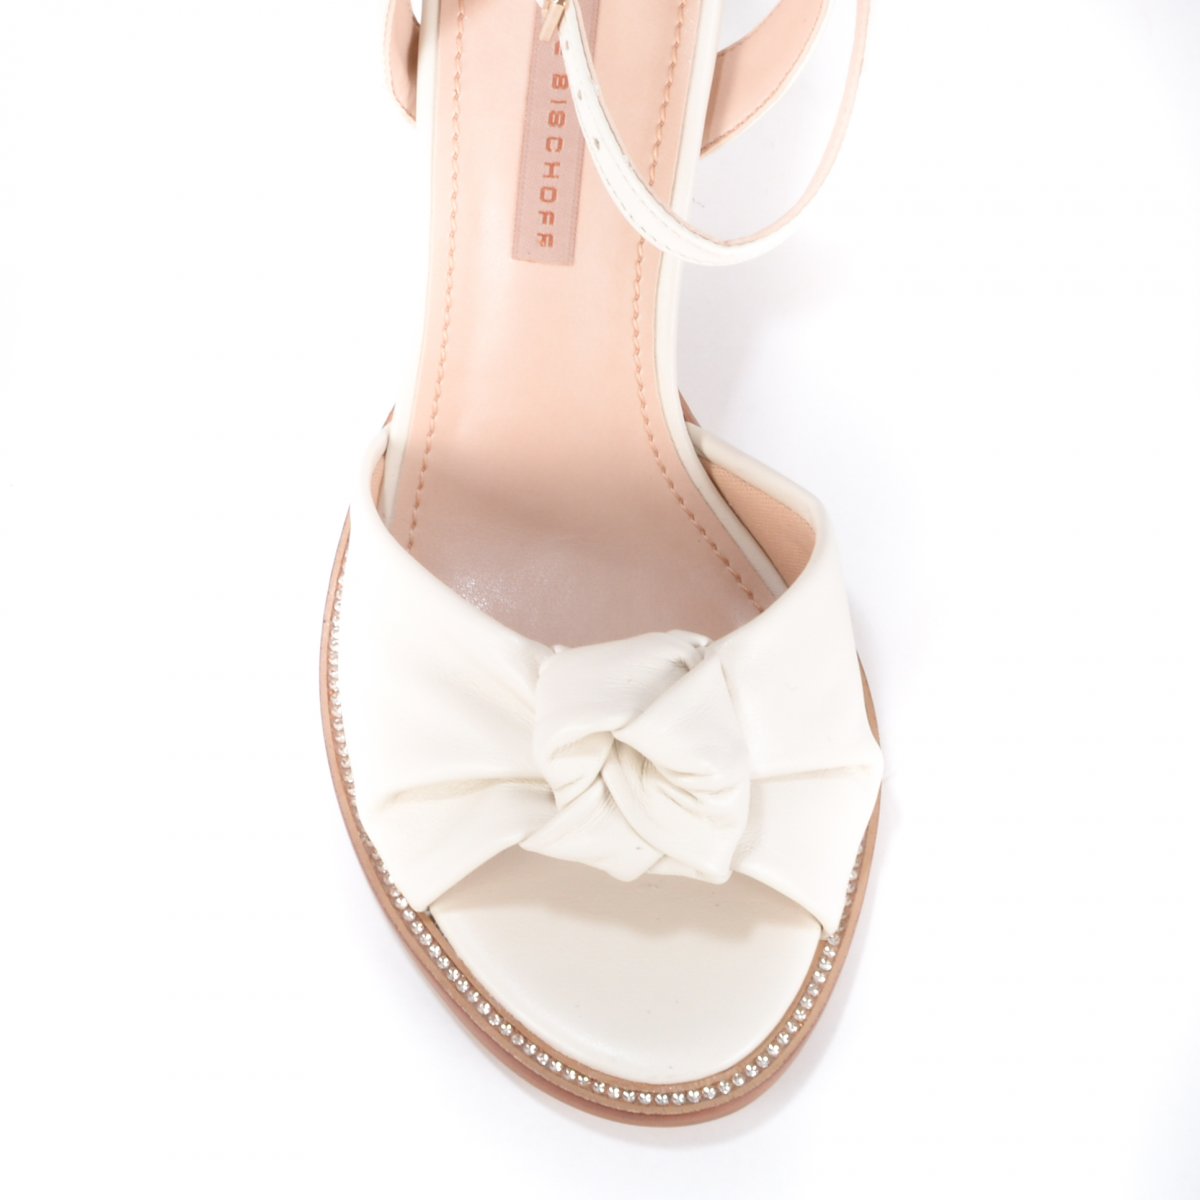 Off White Leather Heeled Sandal with Knot Detail